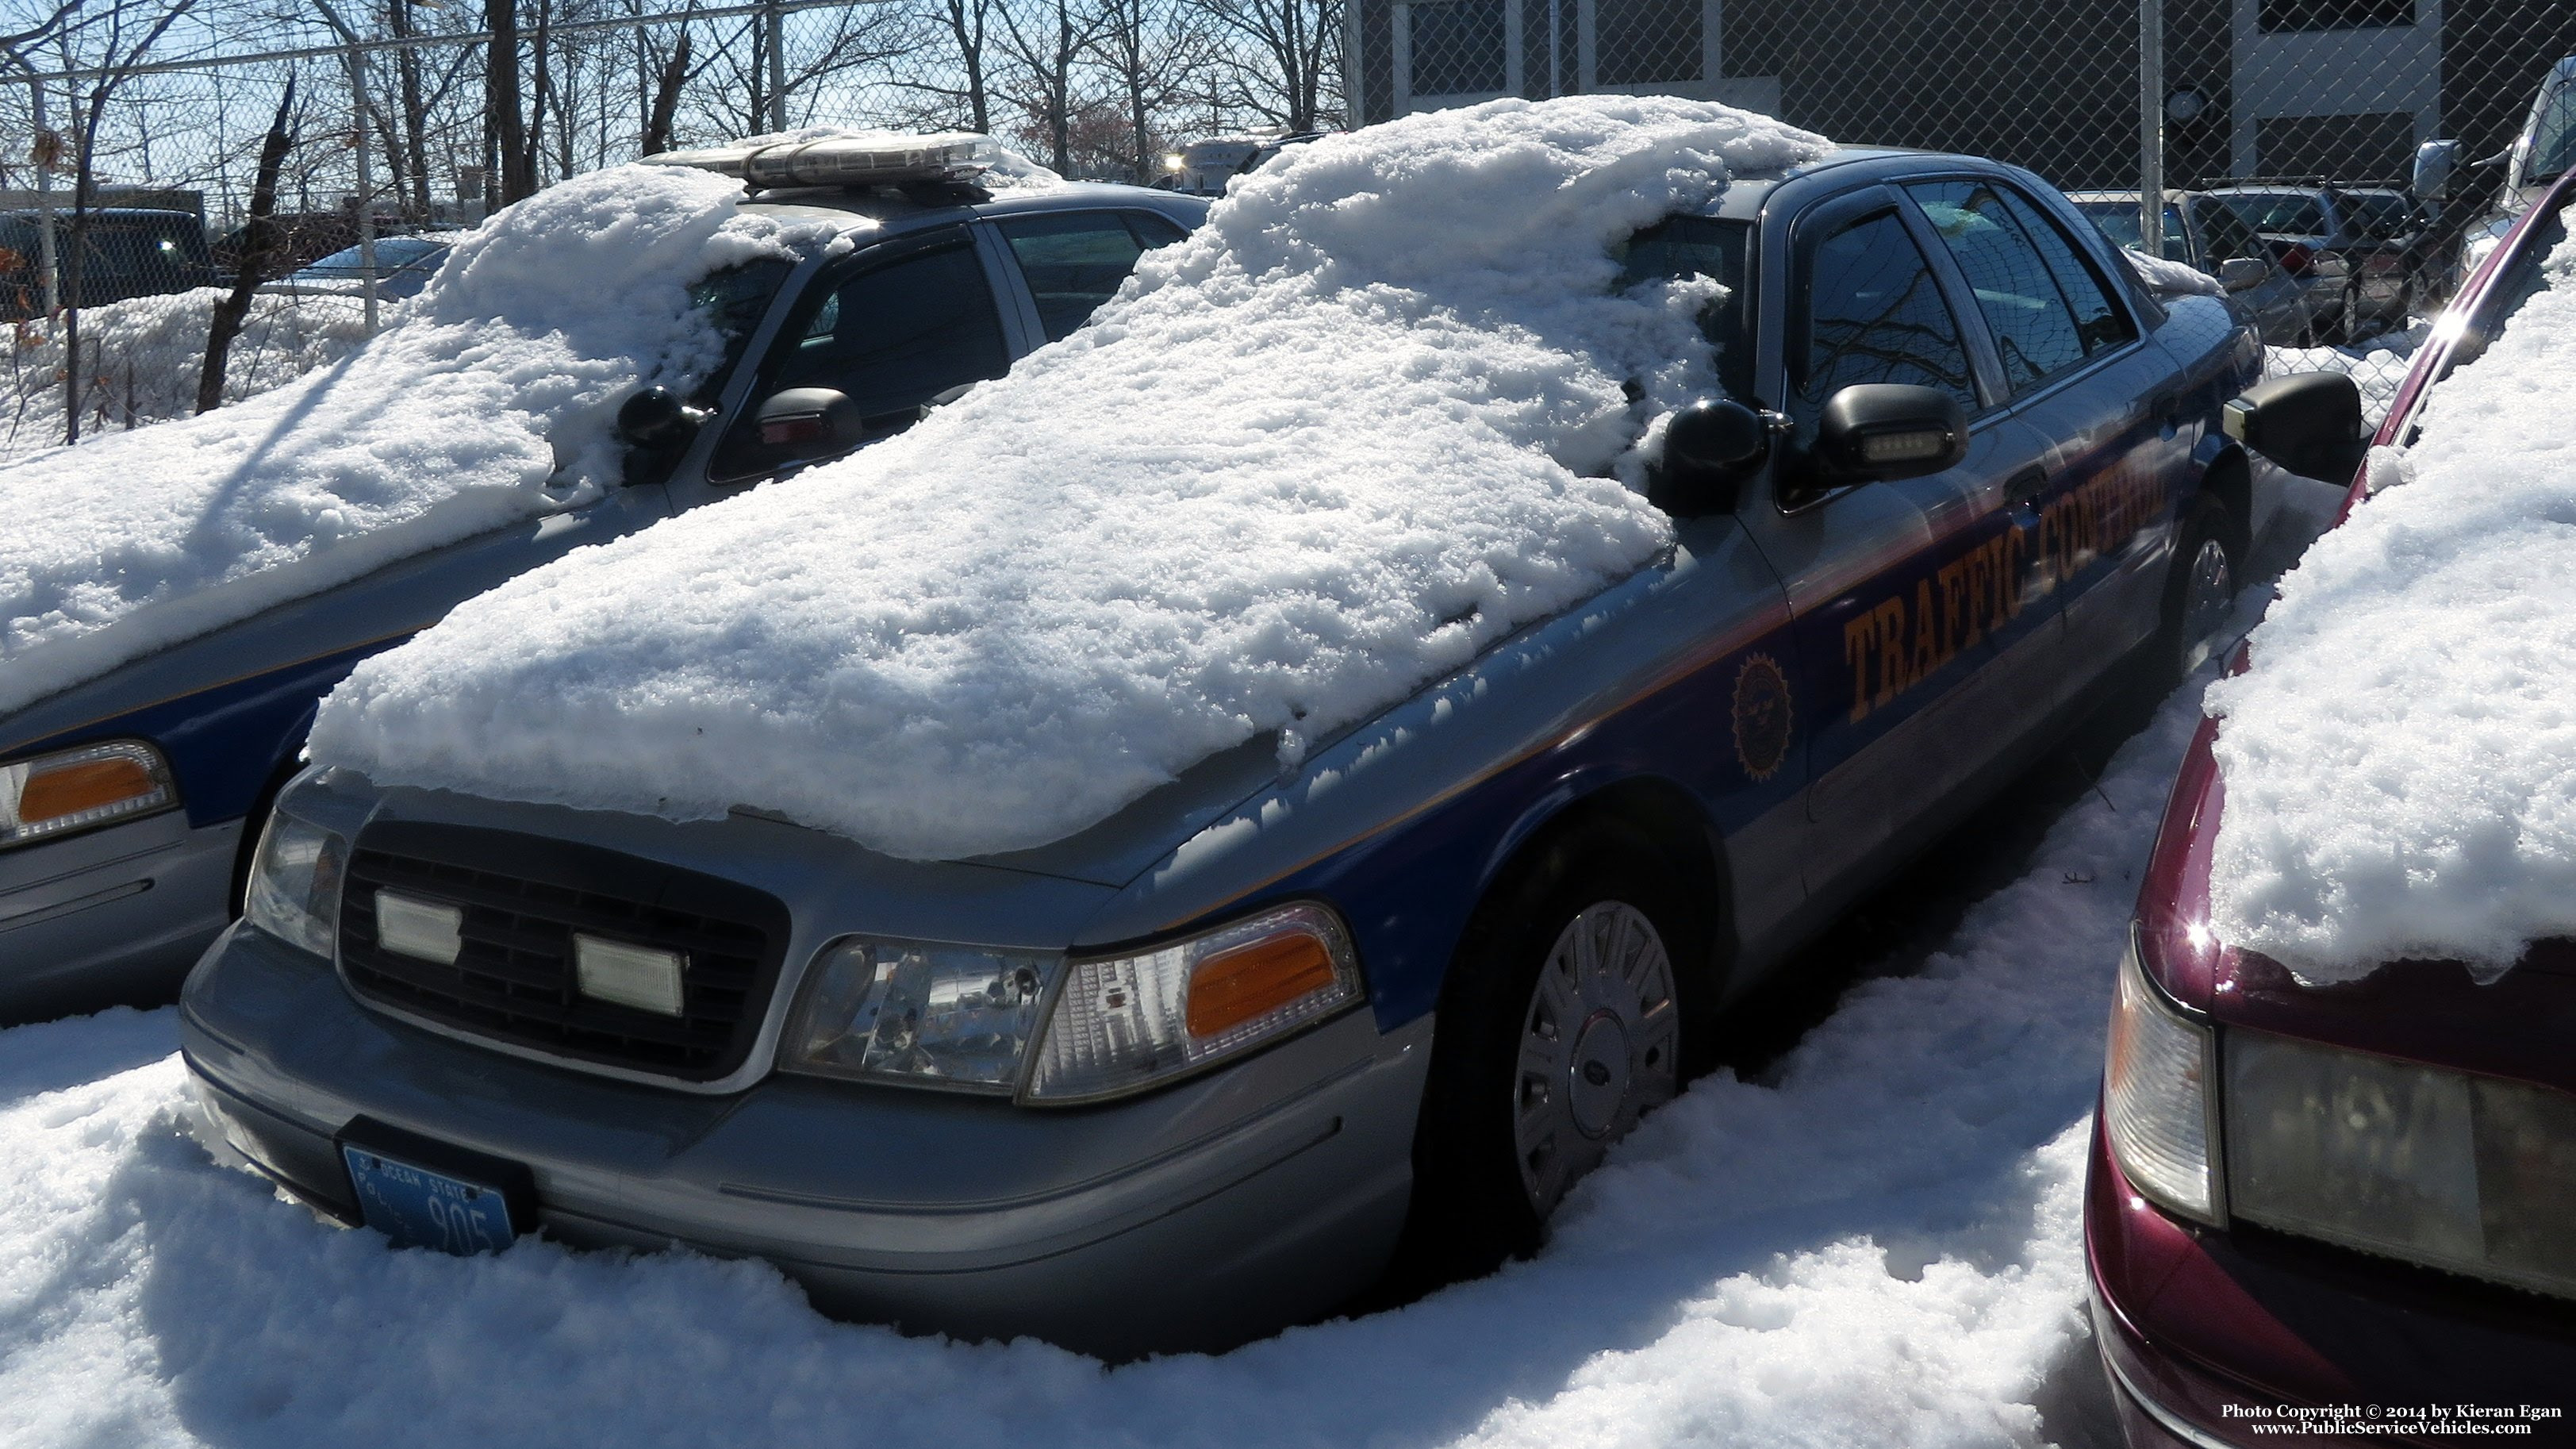 A photo  of East Providence Police
            Traffic Control Unit, a 2003-2005 Ford Crown Victoria Police Interceptor             taken by Kieran Egan